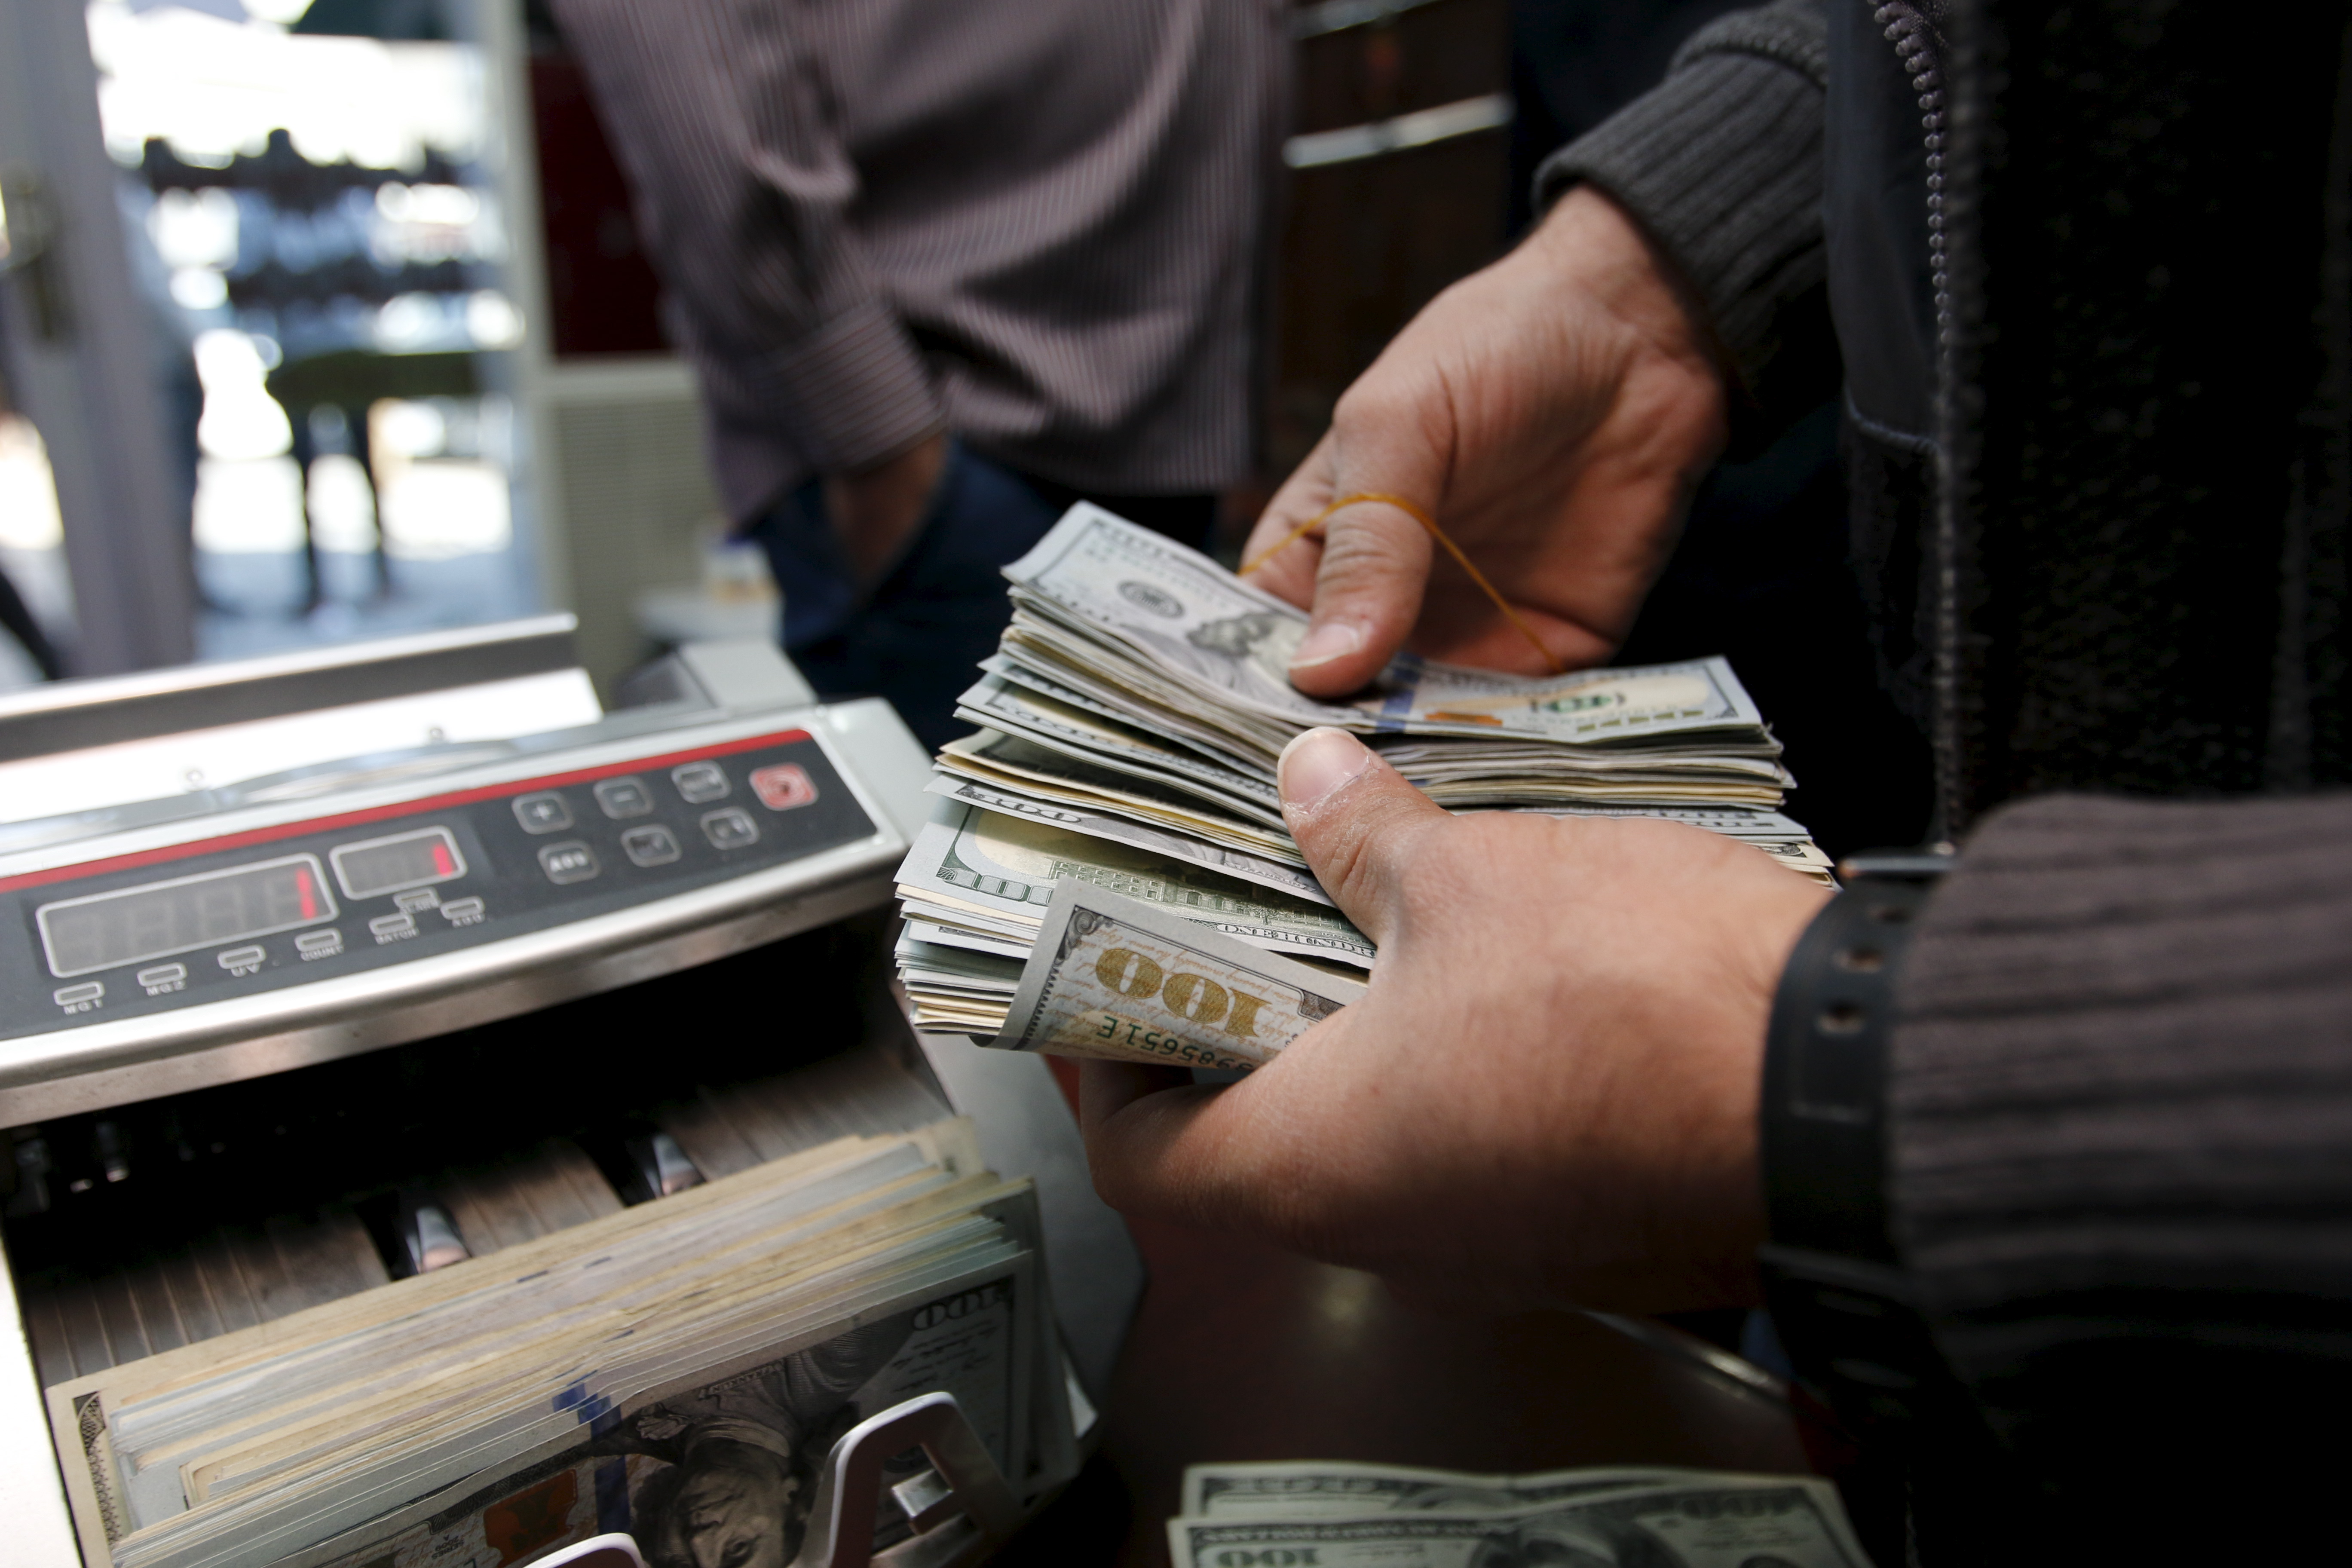 A man counts wads of U.S. dollars on a money counting machine at a currency exchange shop in Baghdad